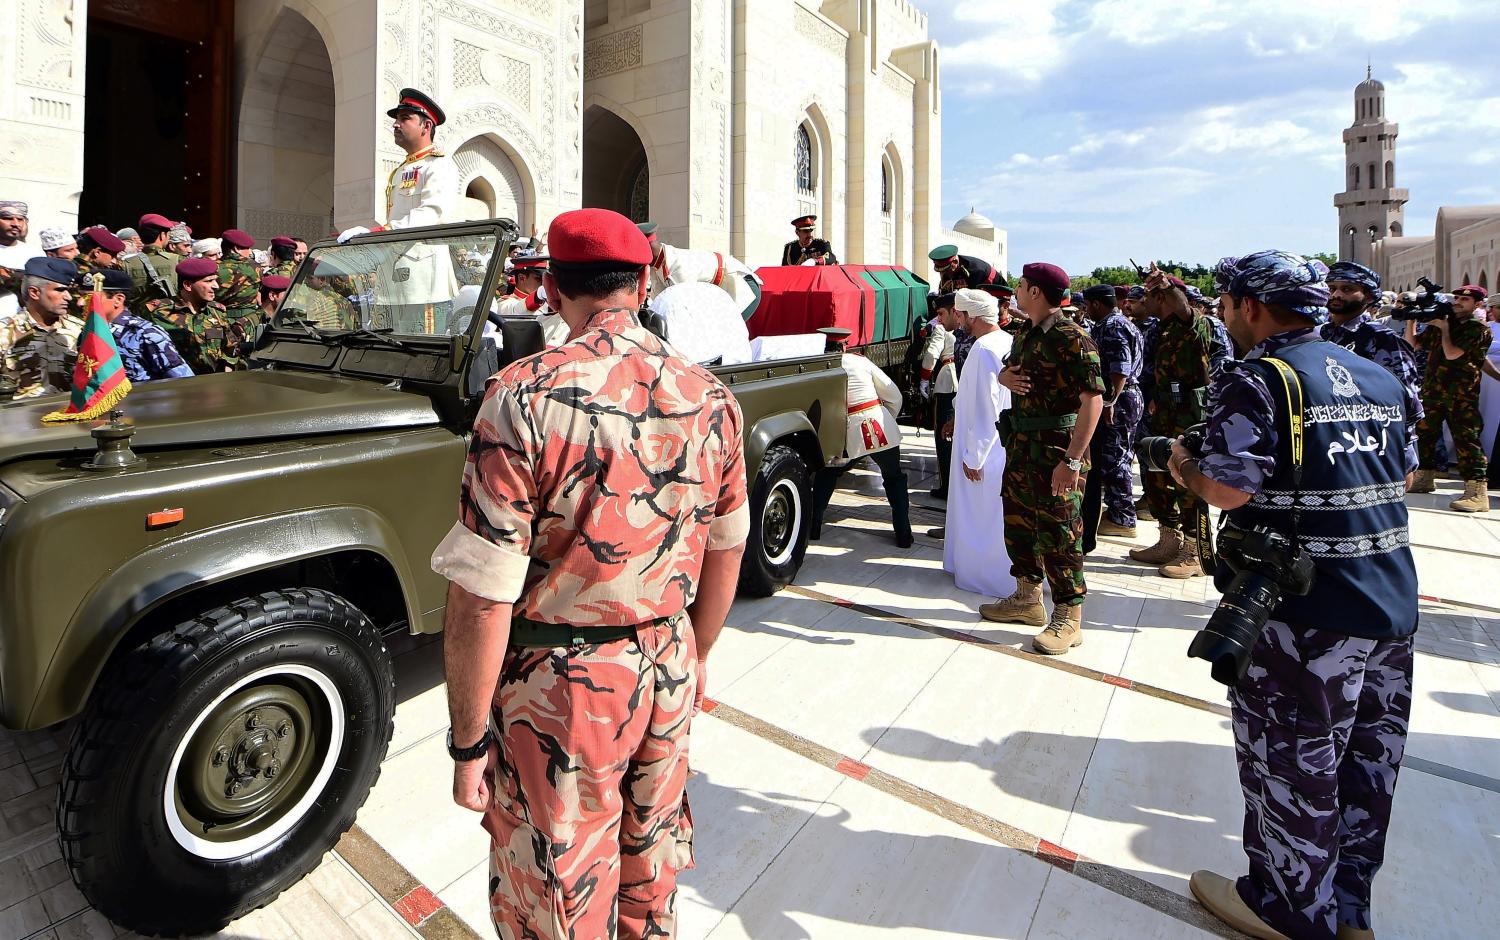 The coffin of late Sultan Qaboos bin Said is fixed to a vehicle during the funeral procession in Muscat, Oman January 11, 2020.  REUTERS/Sultan Al Hasani - RC2NDE9373RG